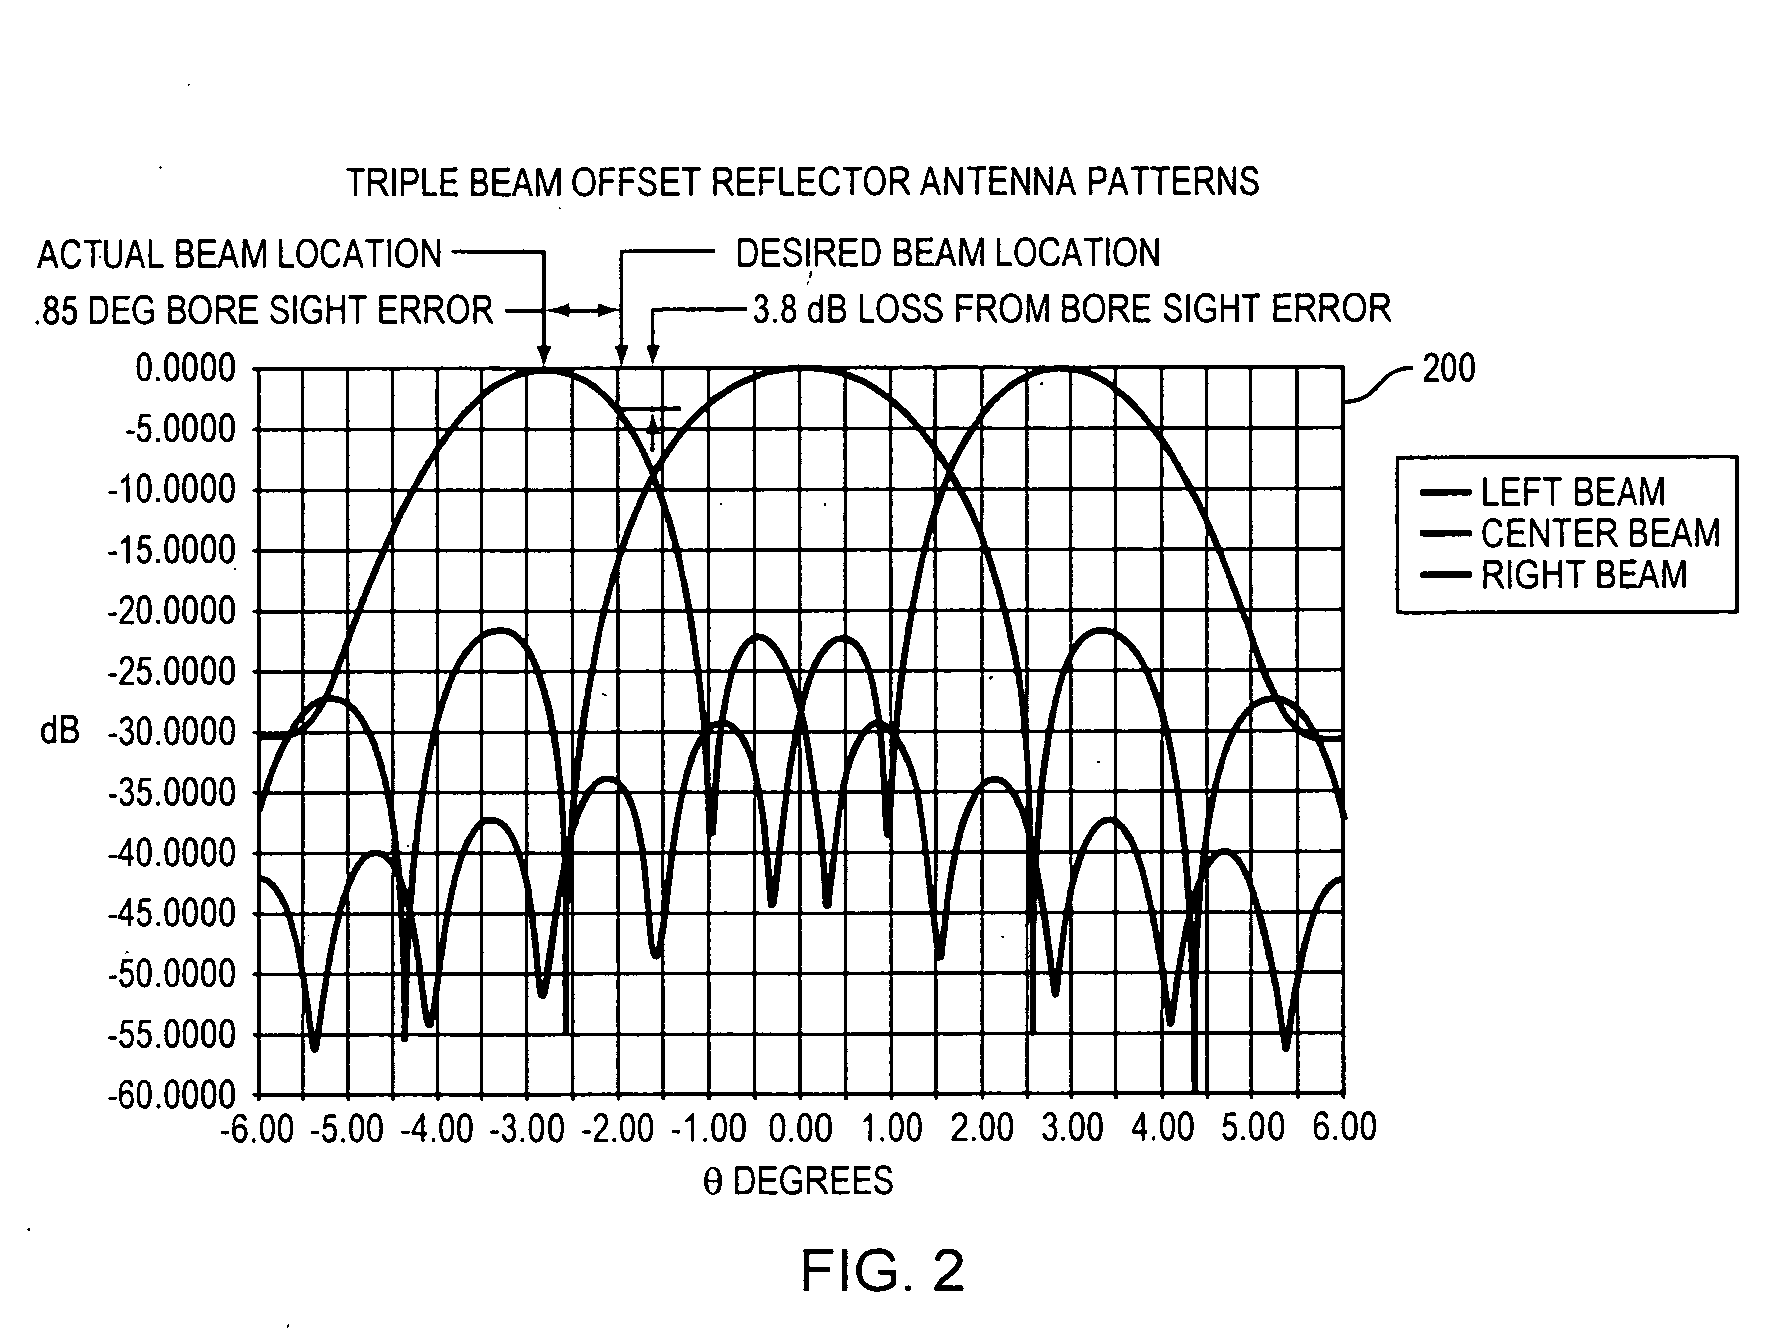 Small wave-guide radiators for closely spaced feeds on multi-beam antennas